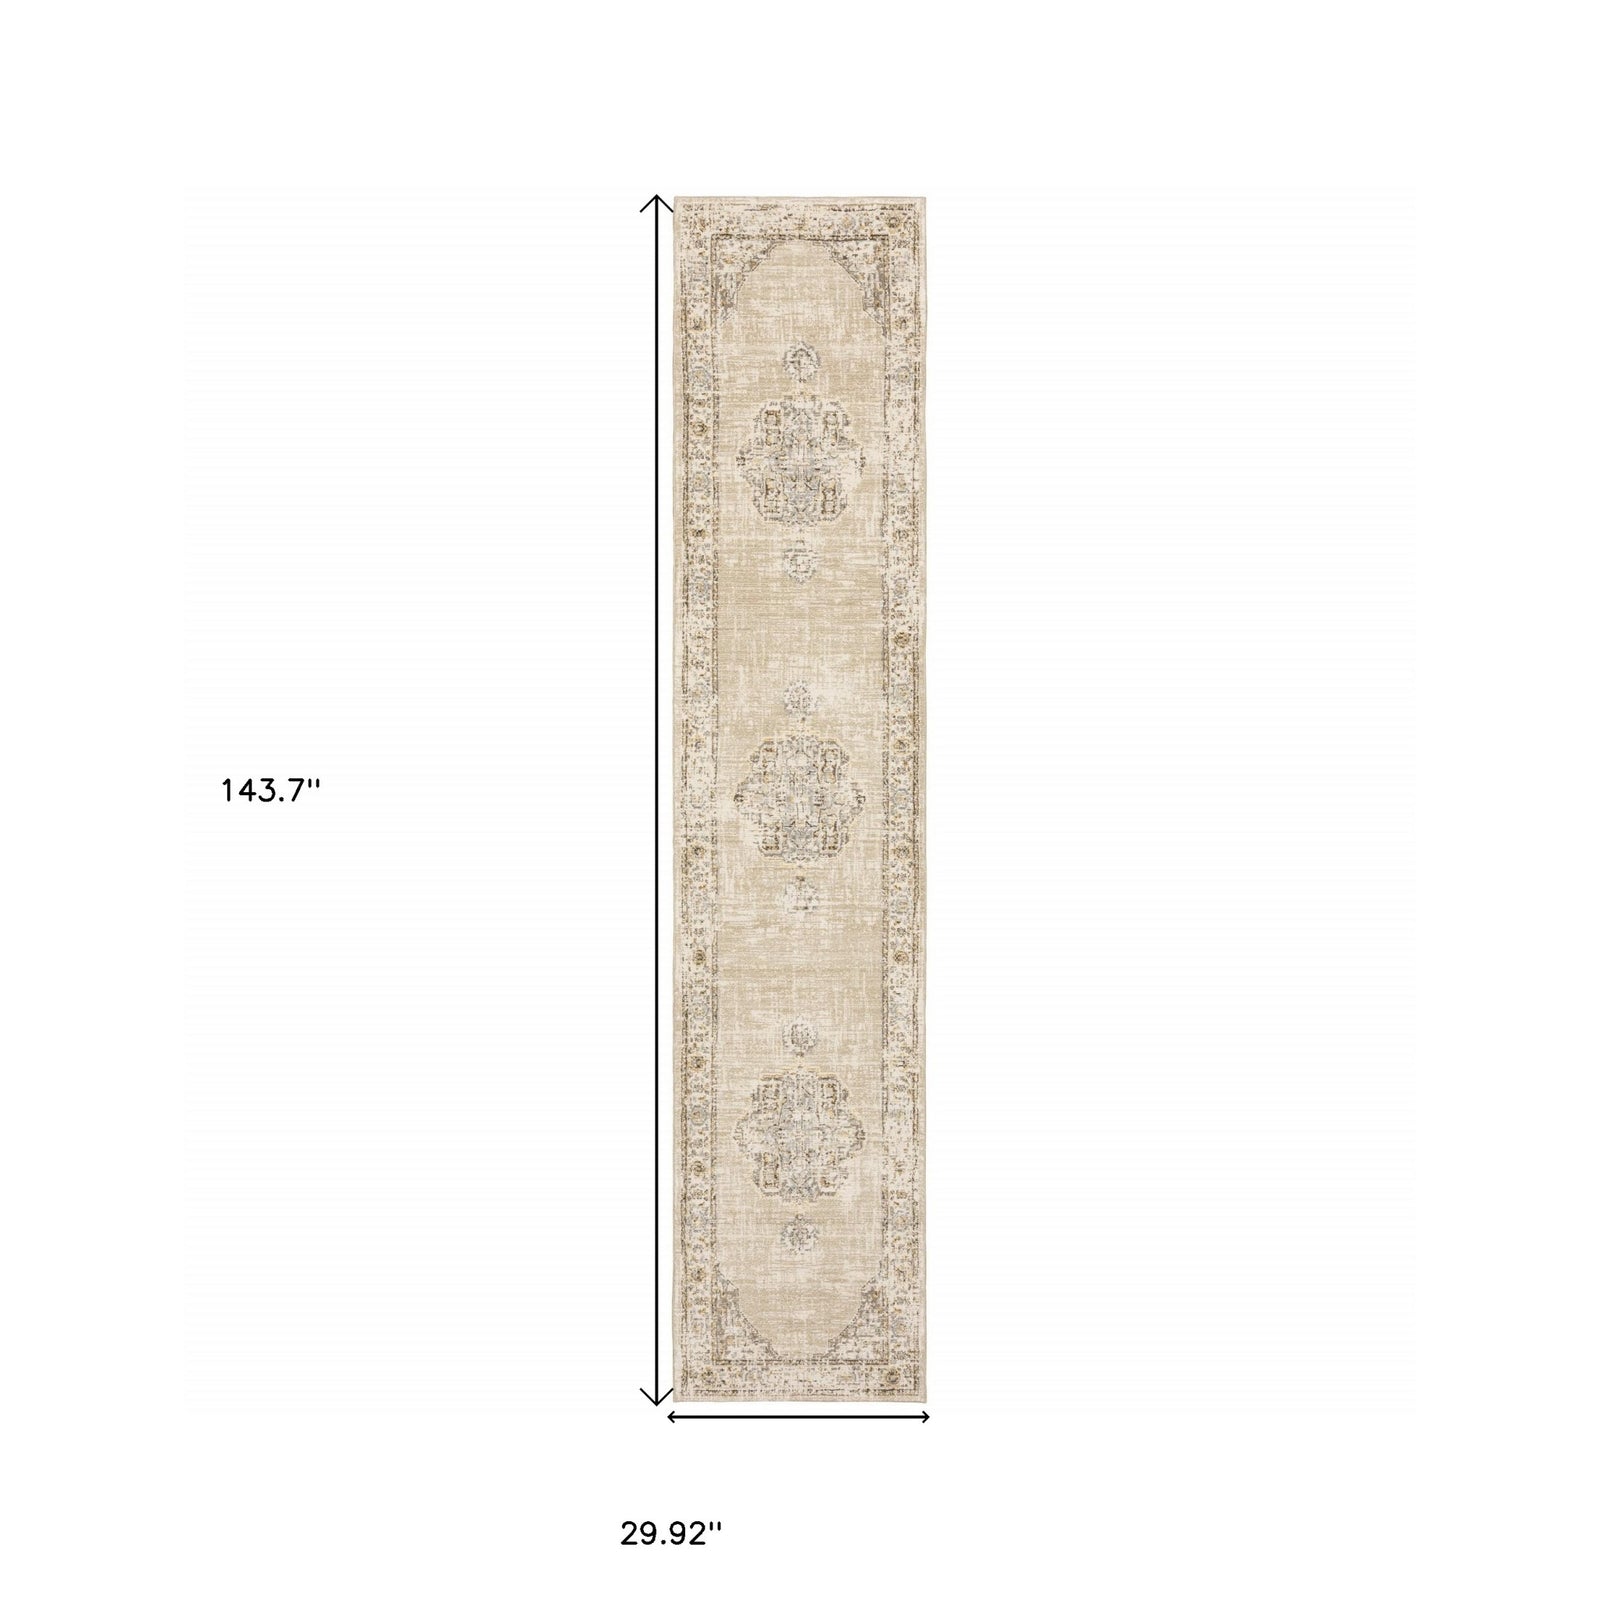 2'X3' Beige And Ivory Center Jewel Area Rug